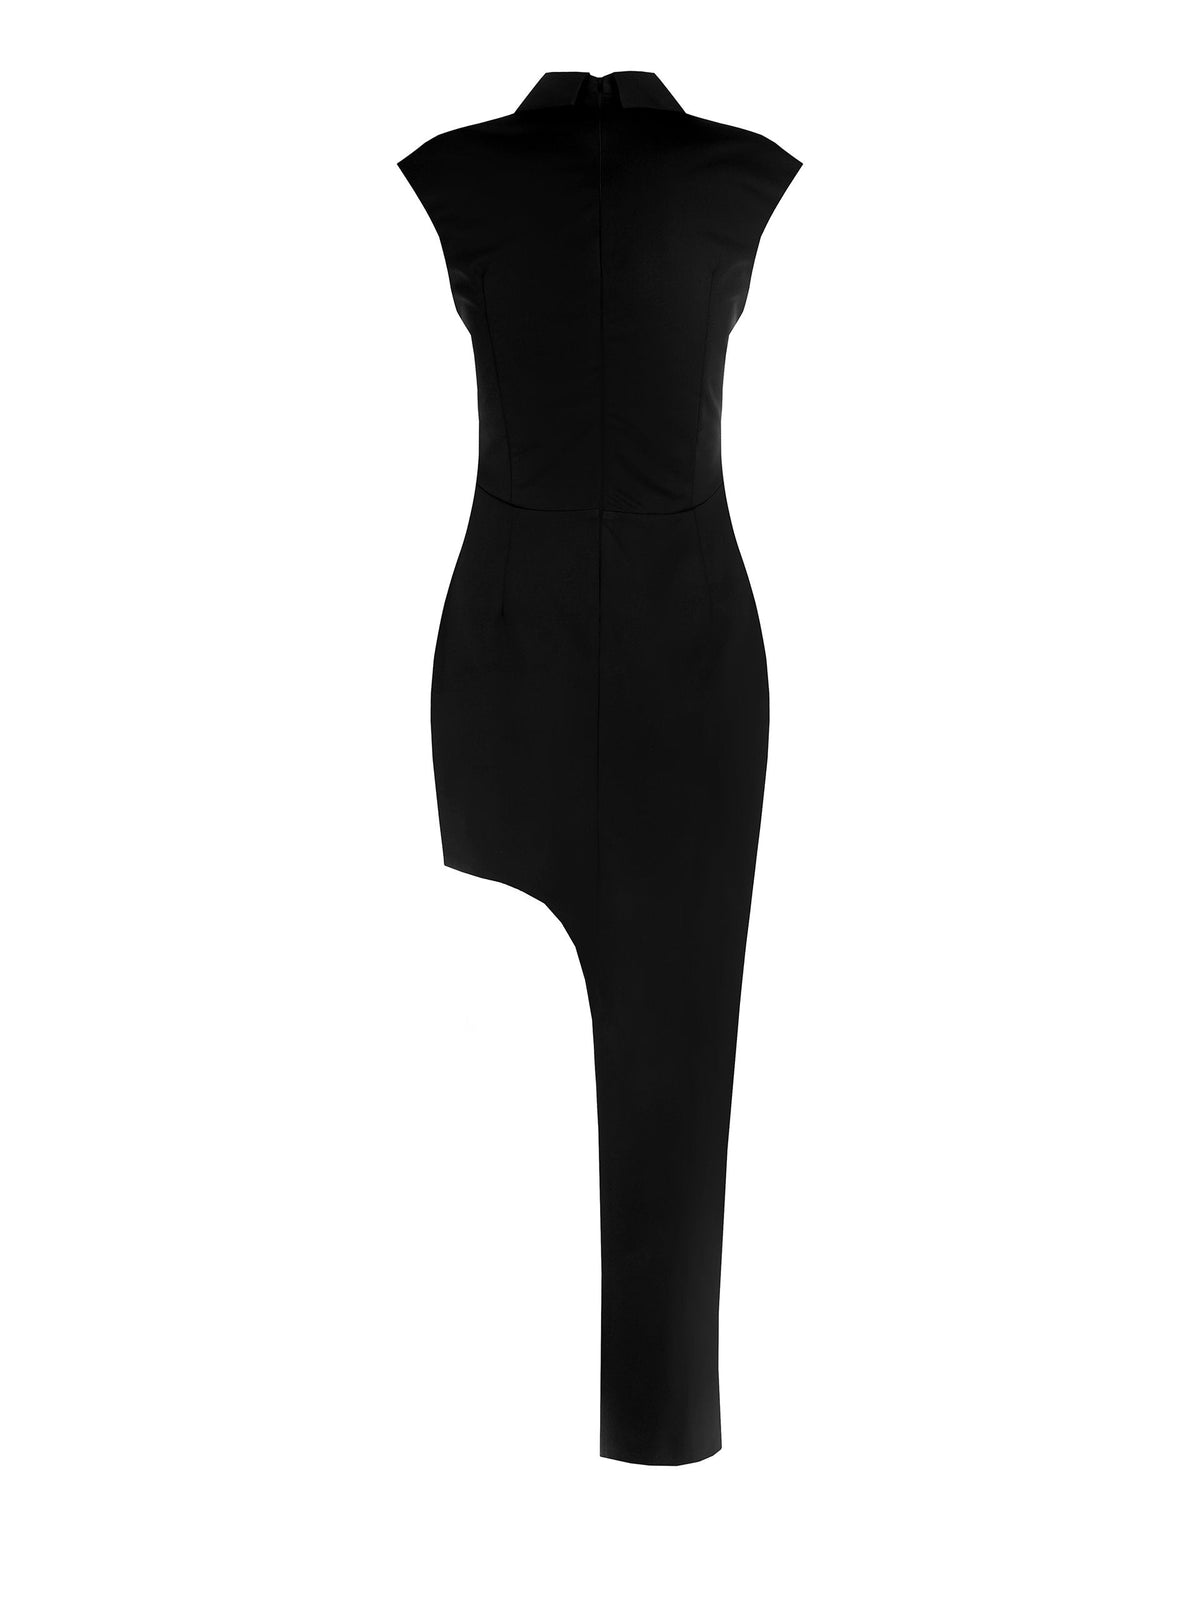 Sheath Dress in Shiny Knit with Teardrop Cut-Out and Shoulder Straps